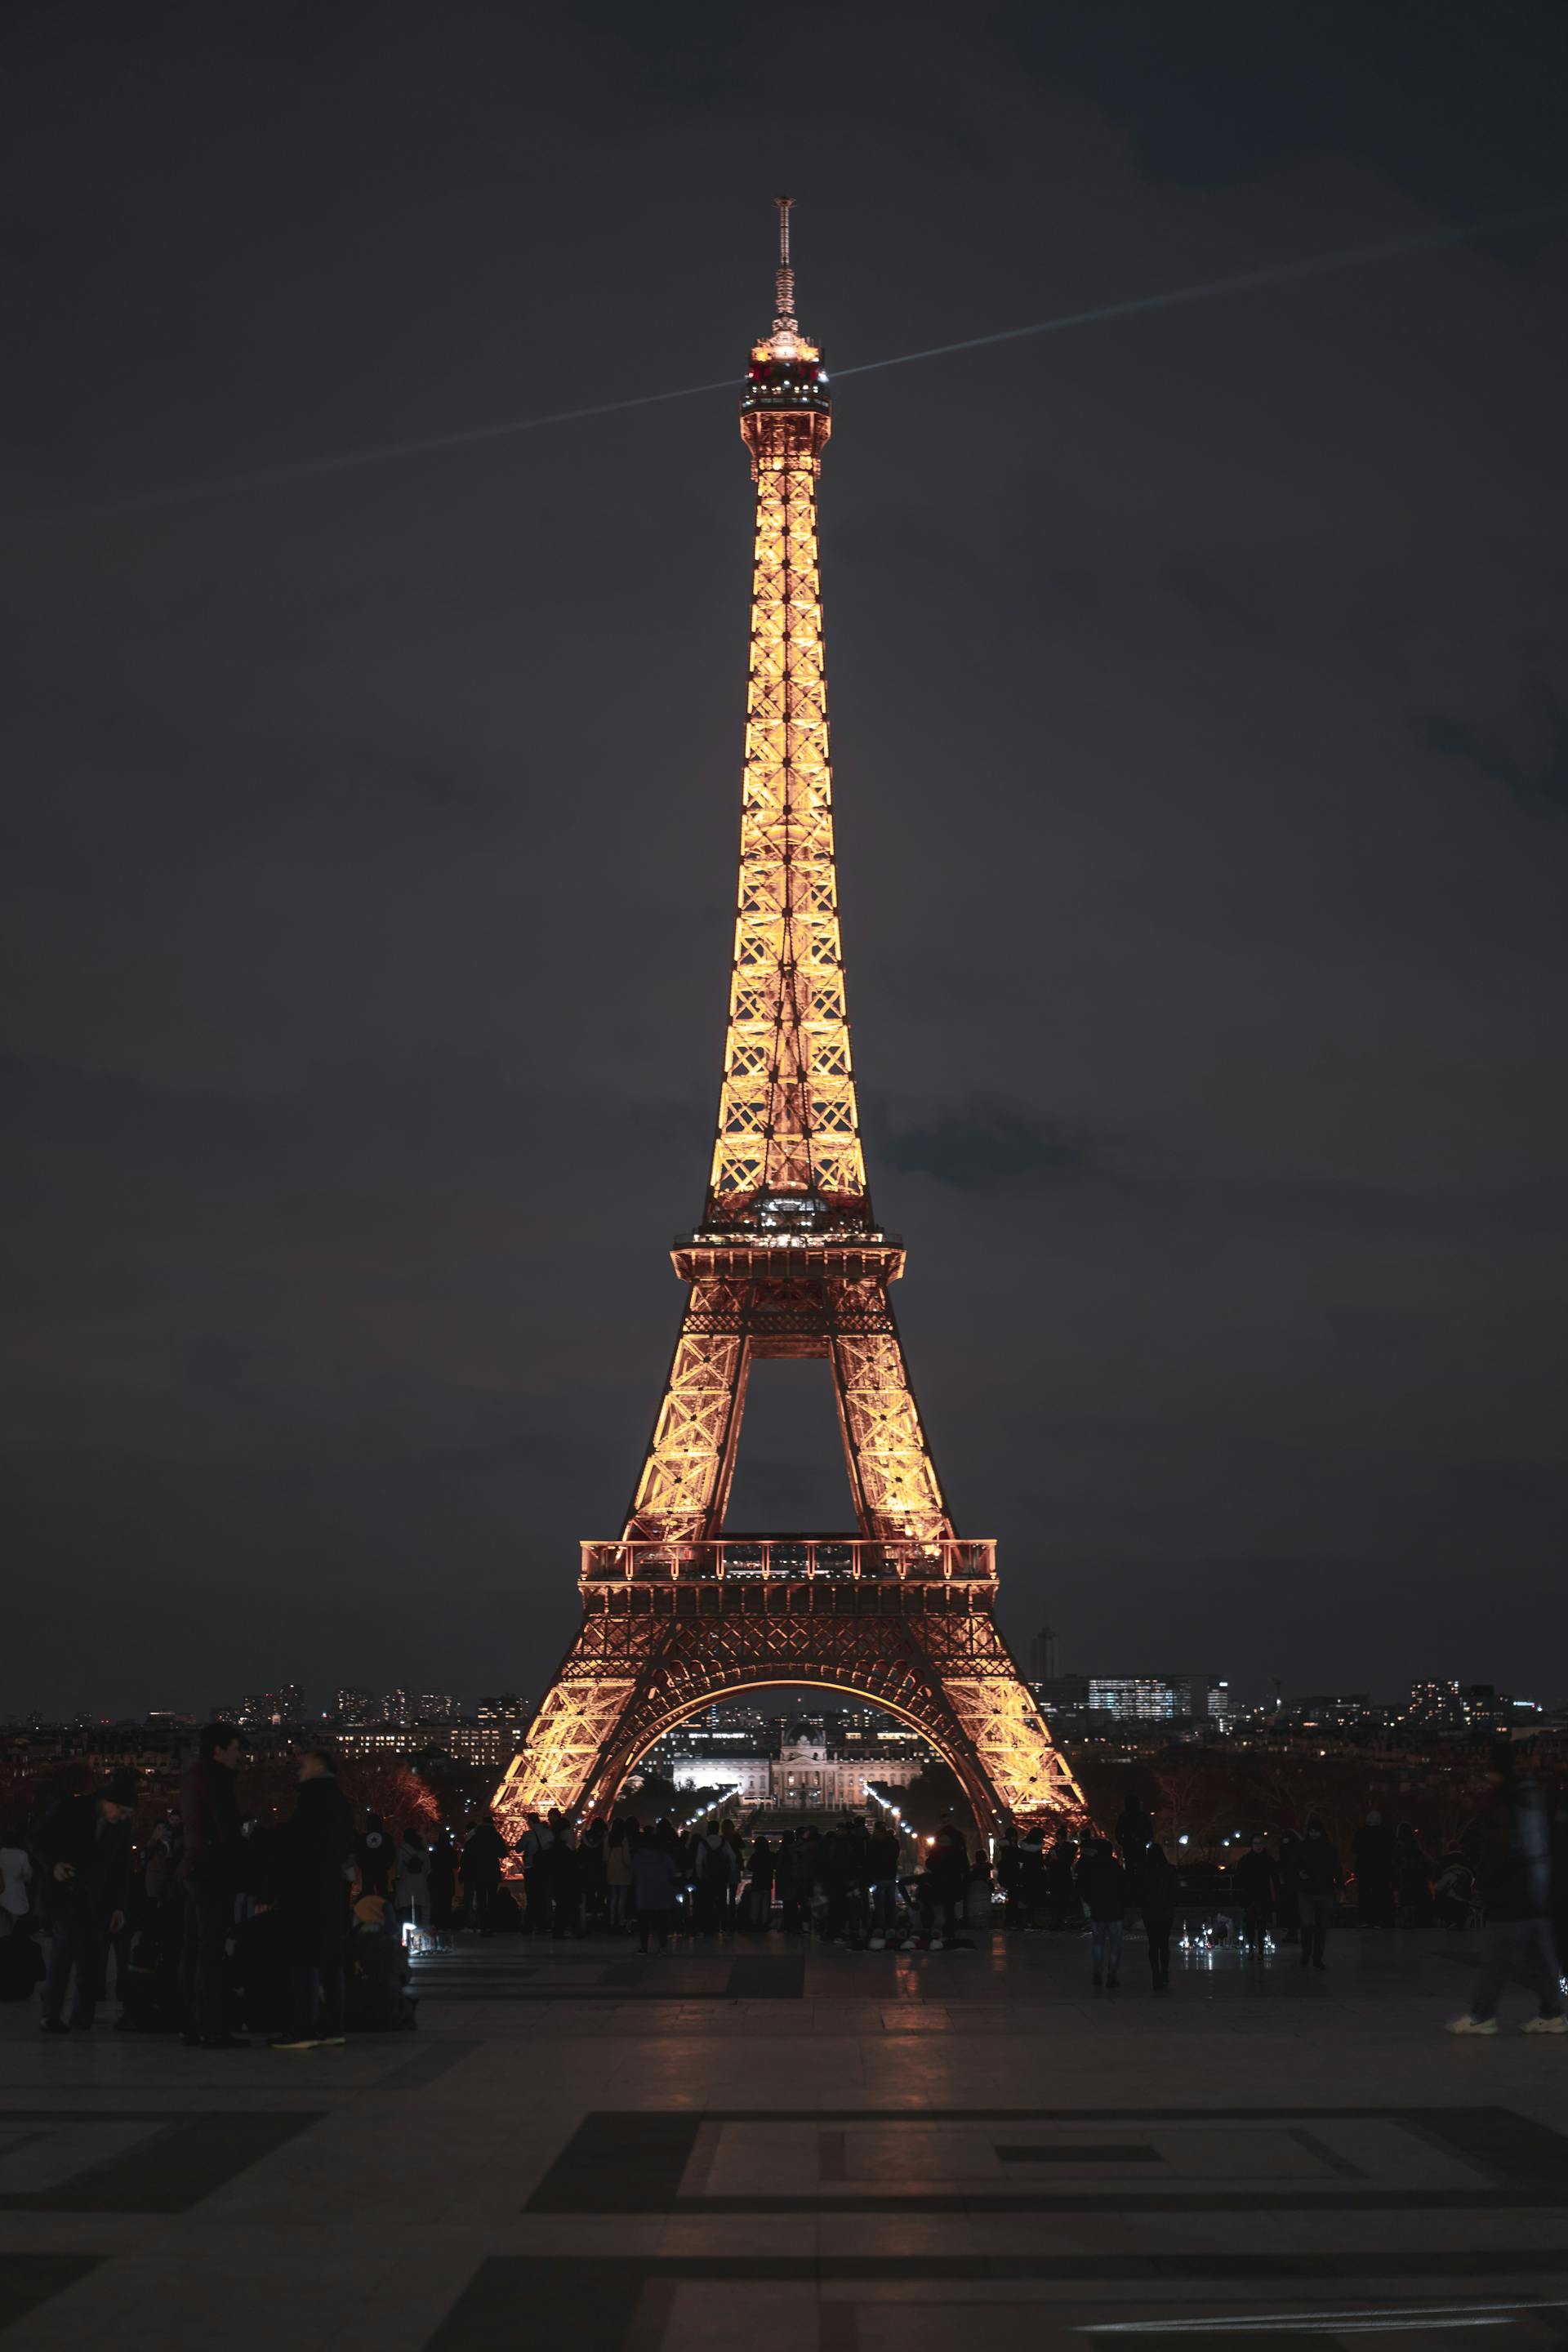 The Eiffel Tower at night | Source: Pexels